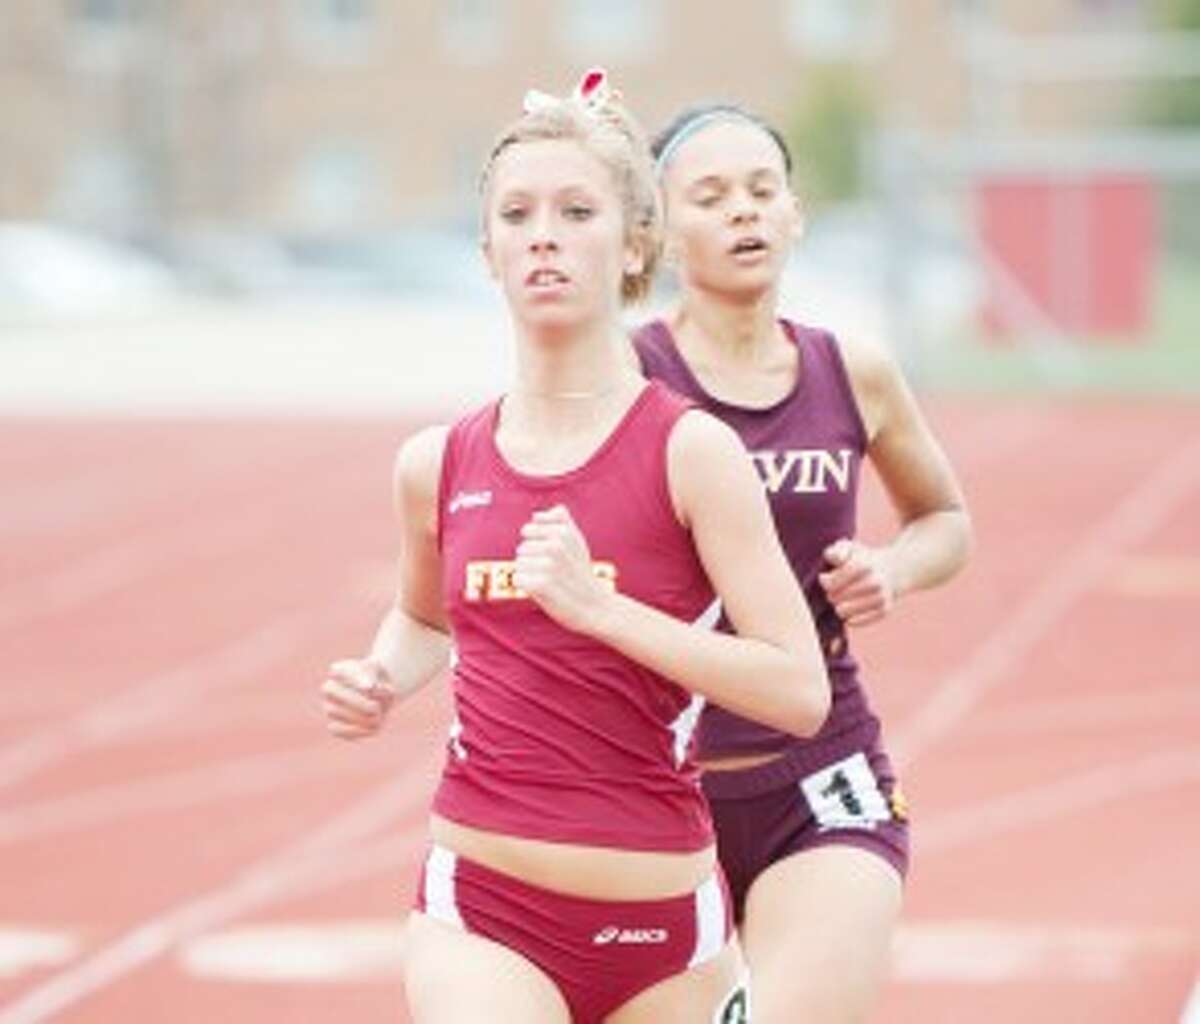 NATIONAL CHAMPION: Anna Rudd captured the second individual national championship in FSU women's track and field history on Friday. (Courtesy photo)